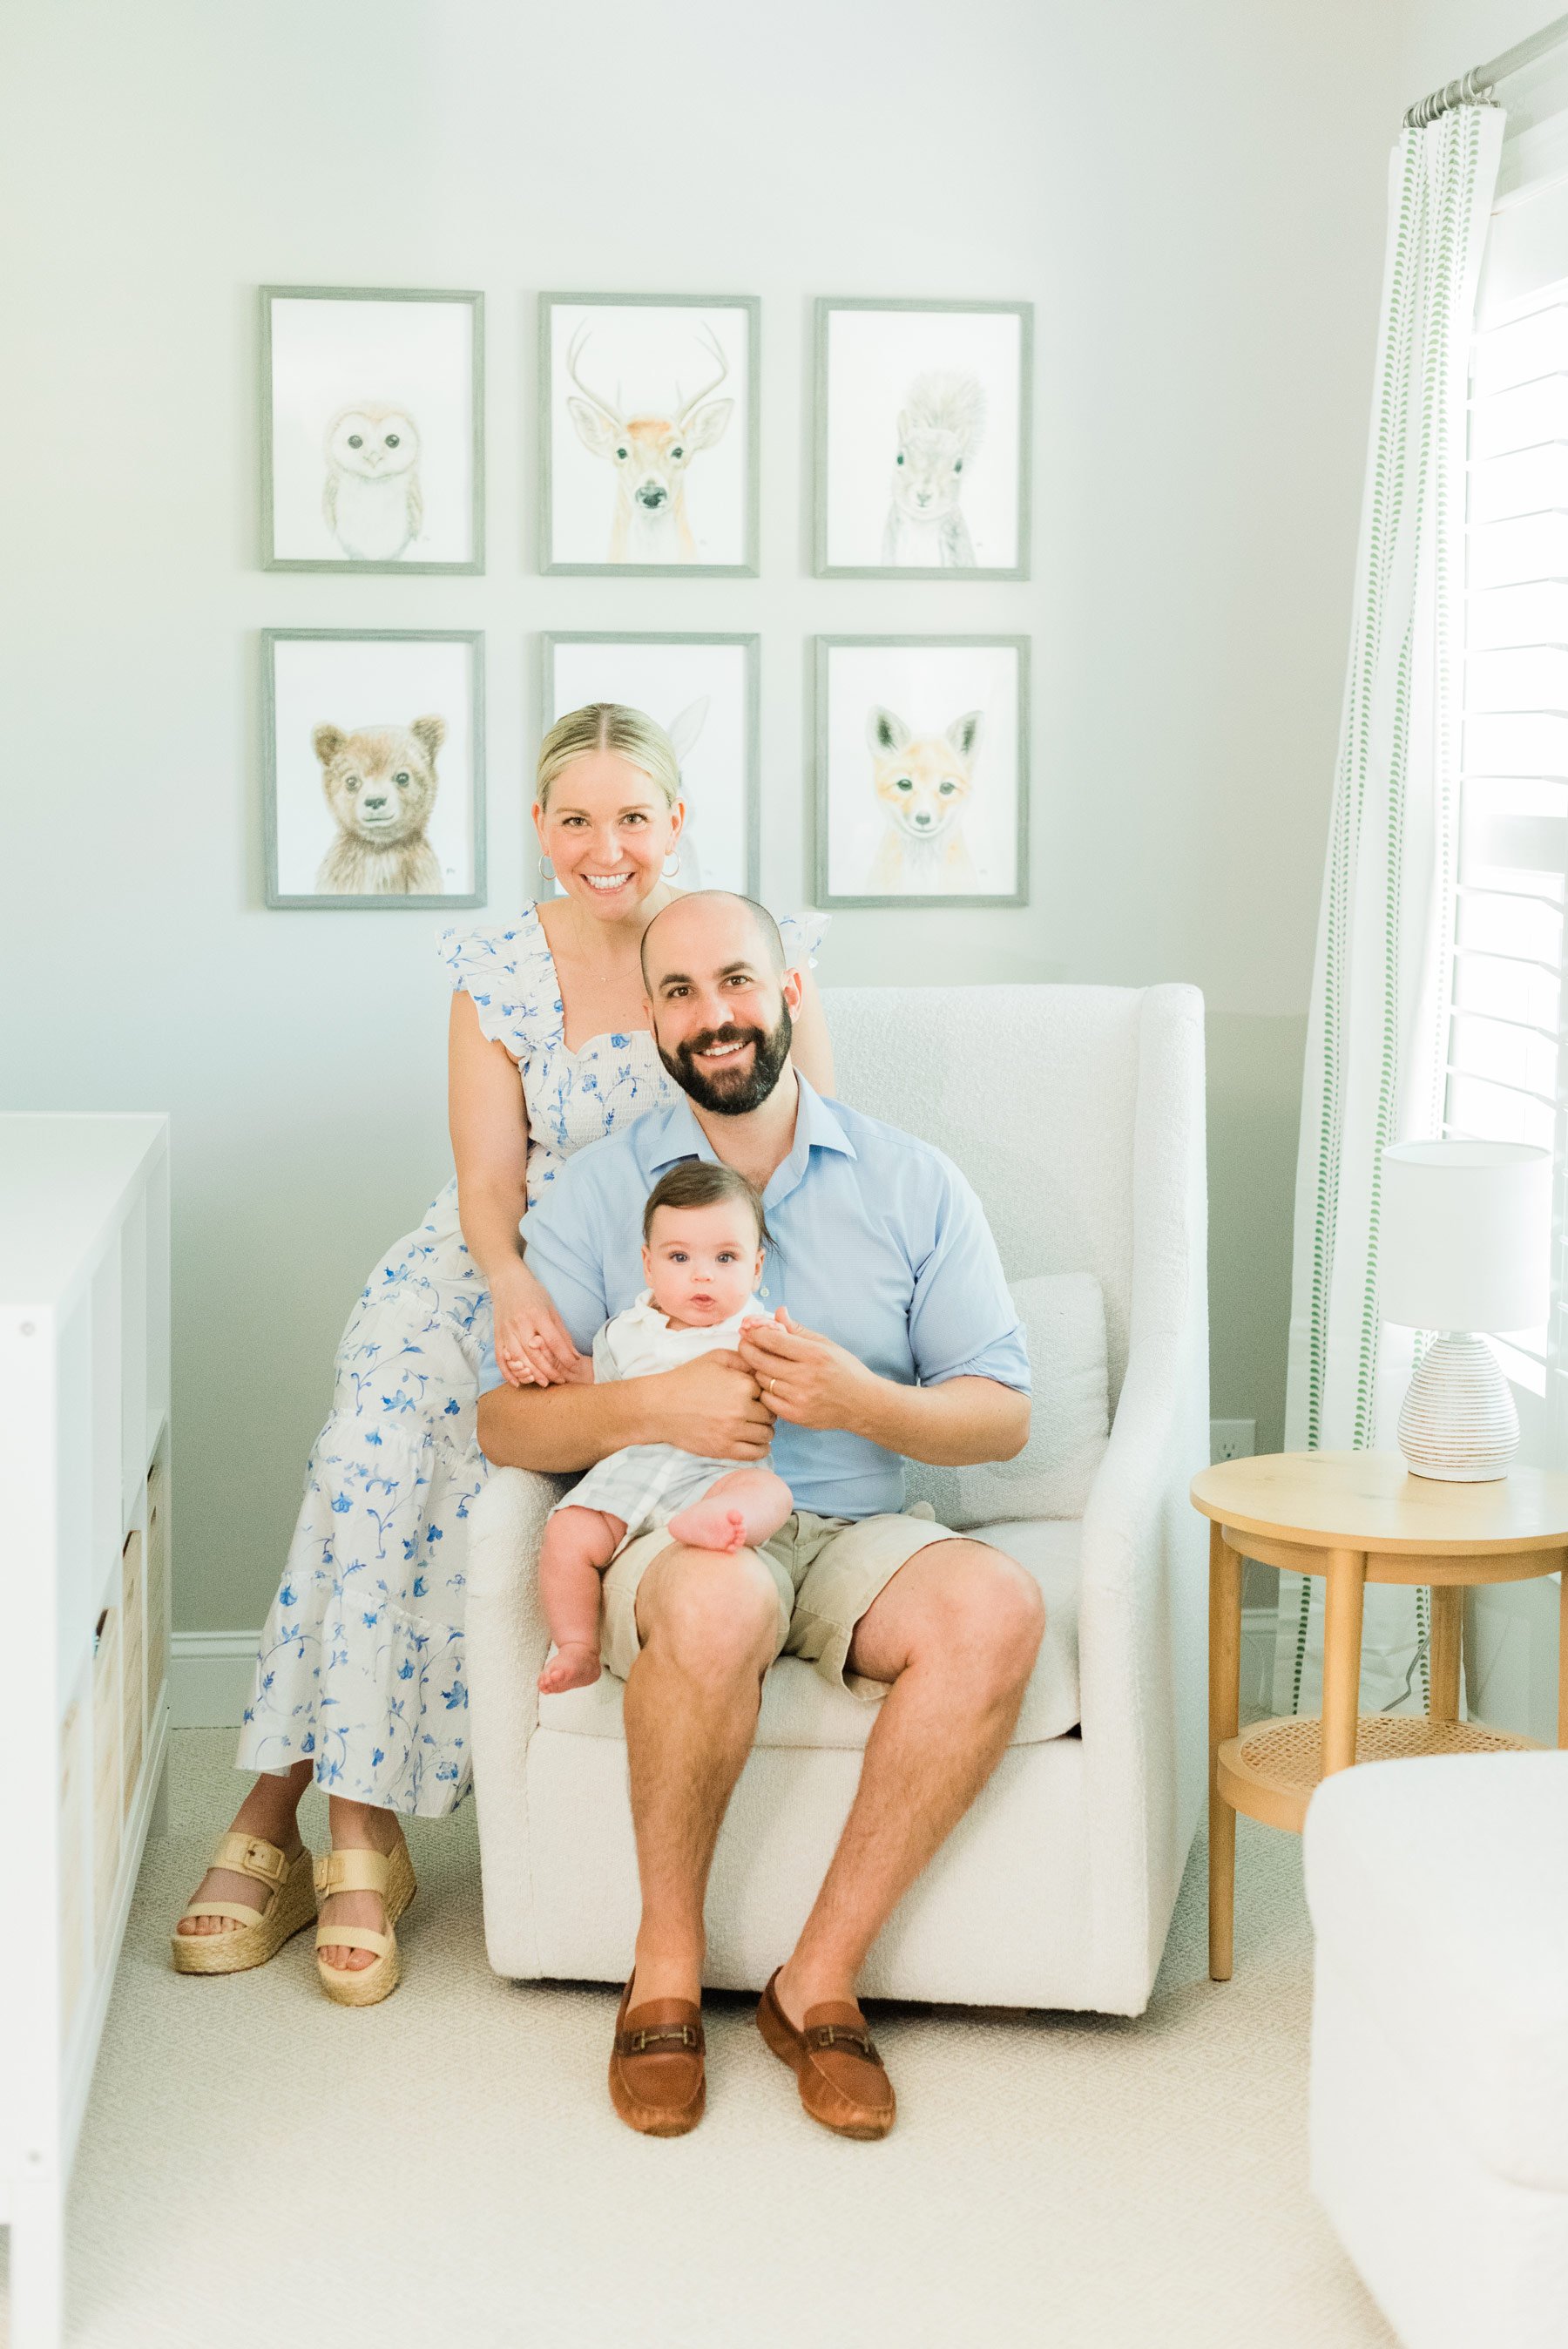  Jacquie Erickson photography shot photos in both the living area and in baby Jack’s nursery, which was super cute, almost like post-newborn newborns. #inhomeportraitsessions #familyphotos #portraitphotography #atlantaphotographer #jacquieerickson #f